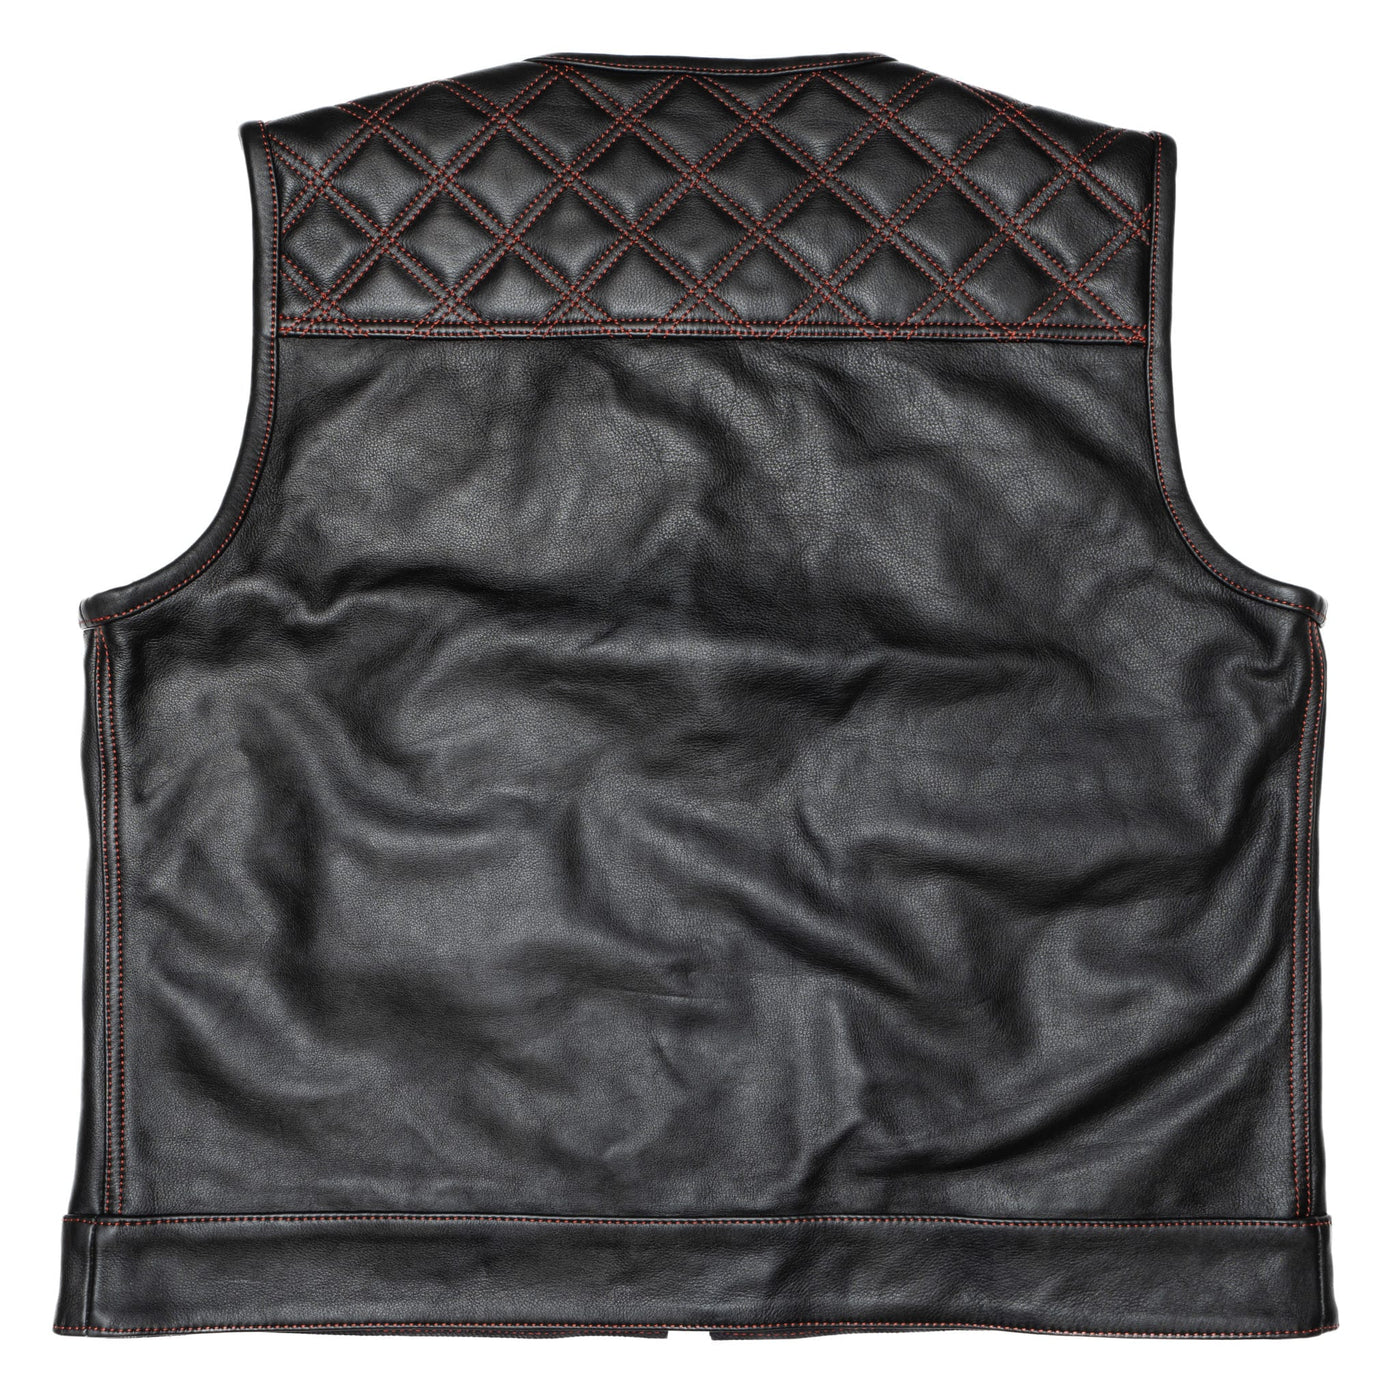 Lords x Cleaver Culture Moto Vest - Black Leather/Red